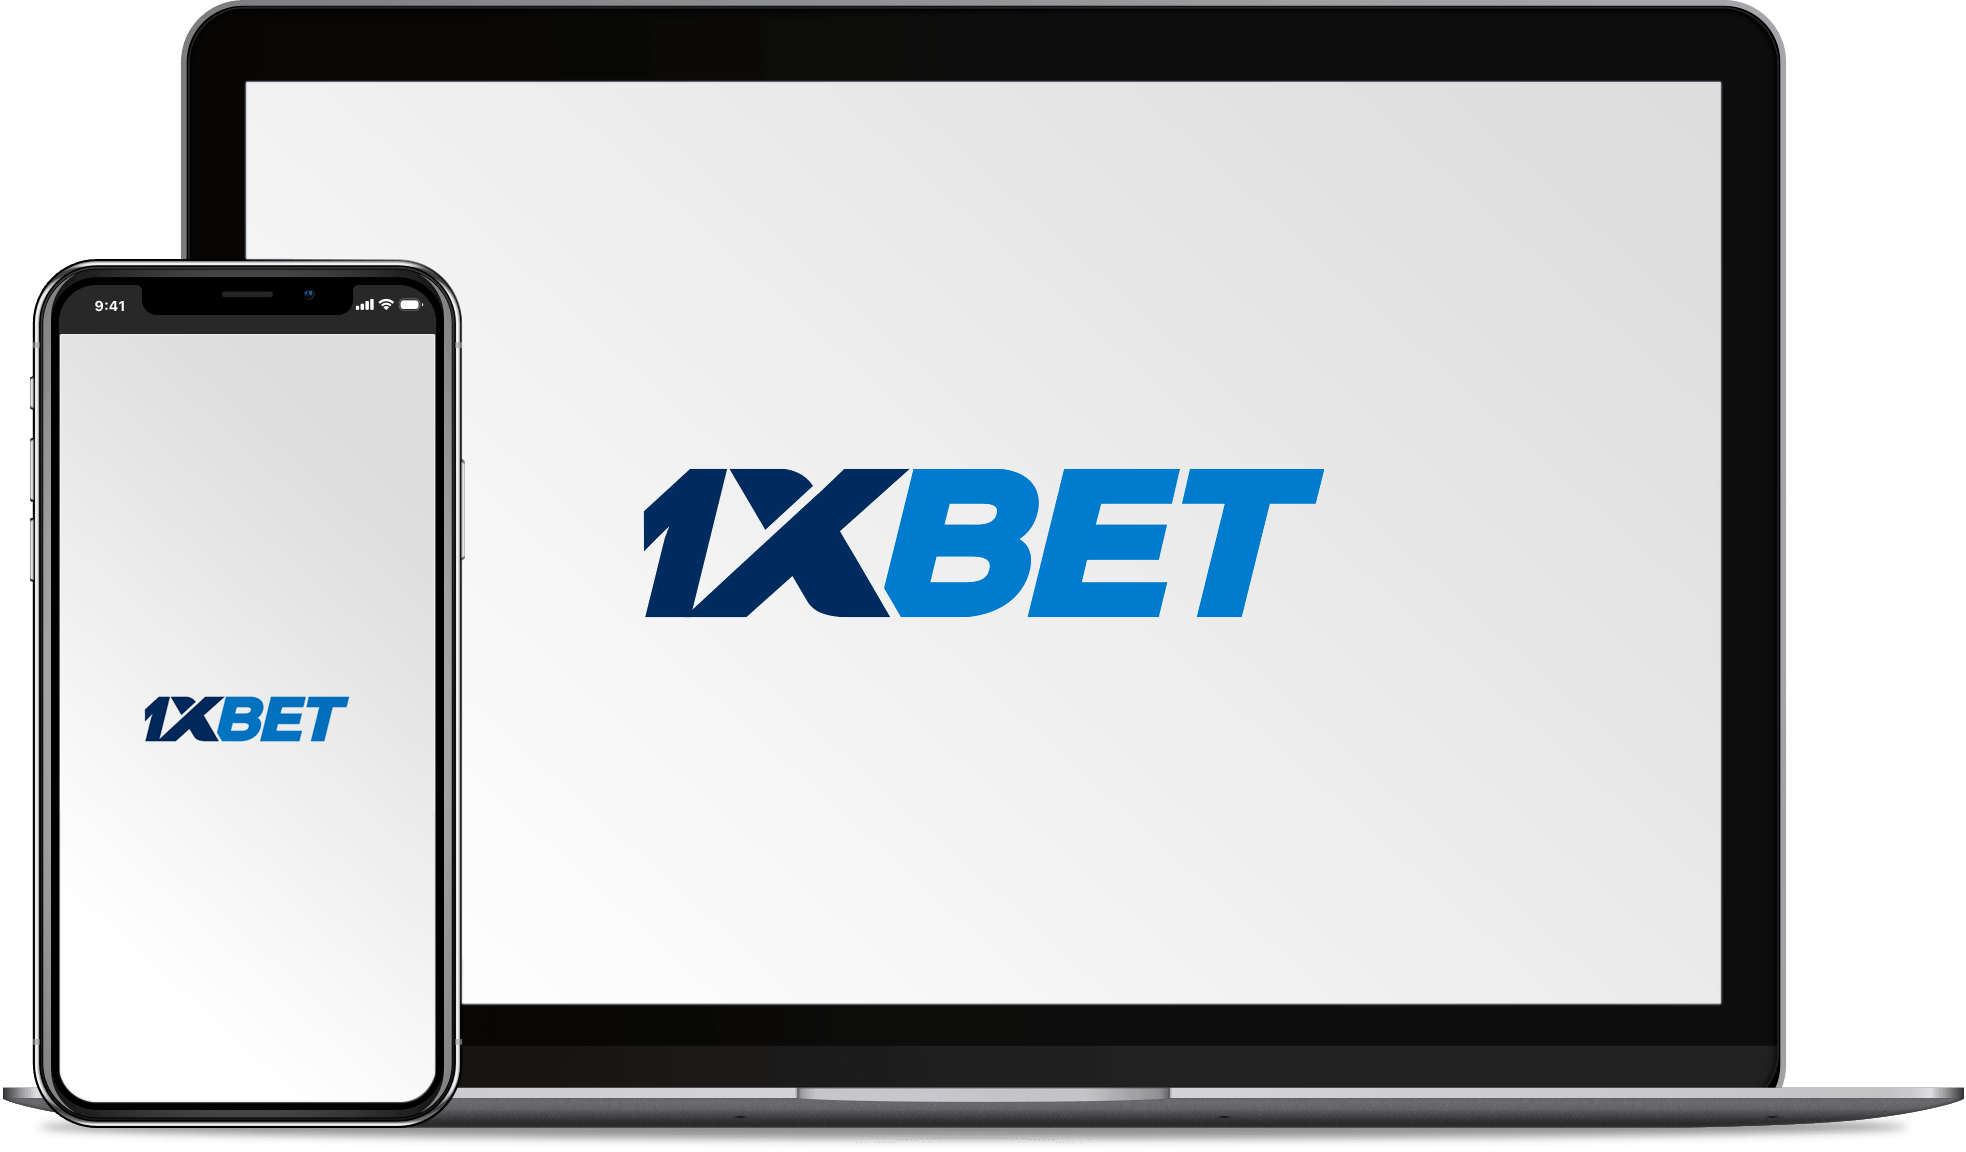 Apply Any Of These 10 Secret Techniques To Improve what is promo code in 1xbet registration